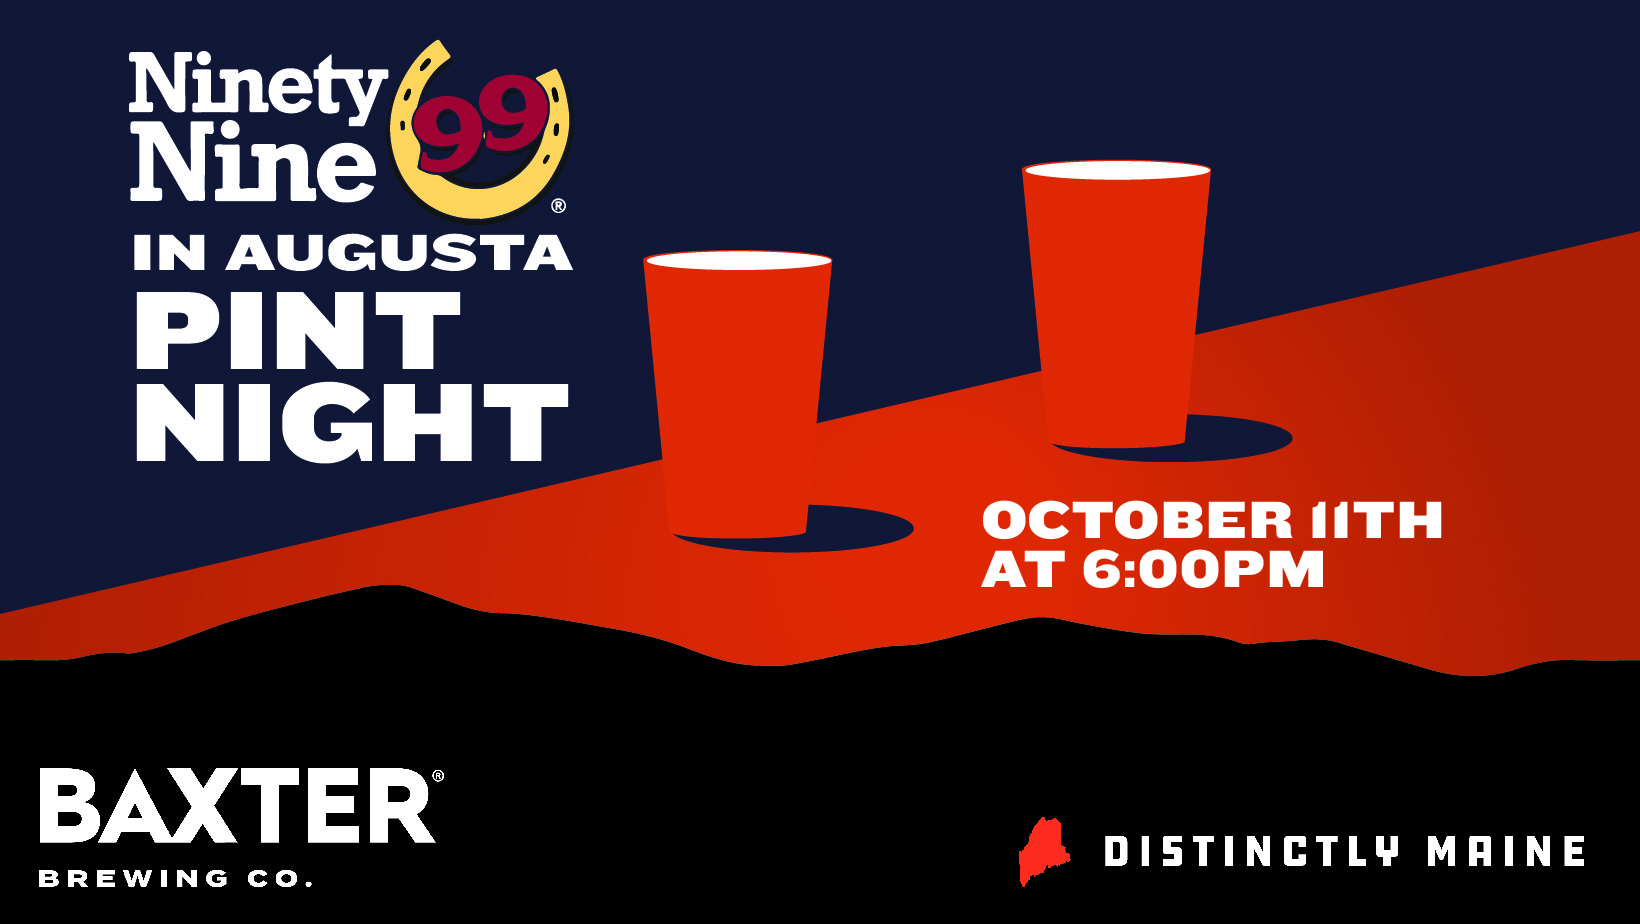 image promoting a Pint Night at 99 in Augusta